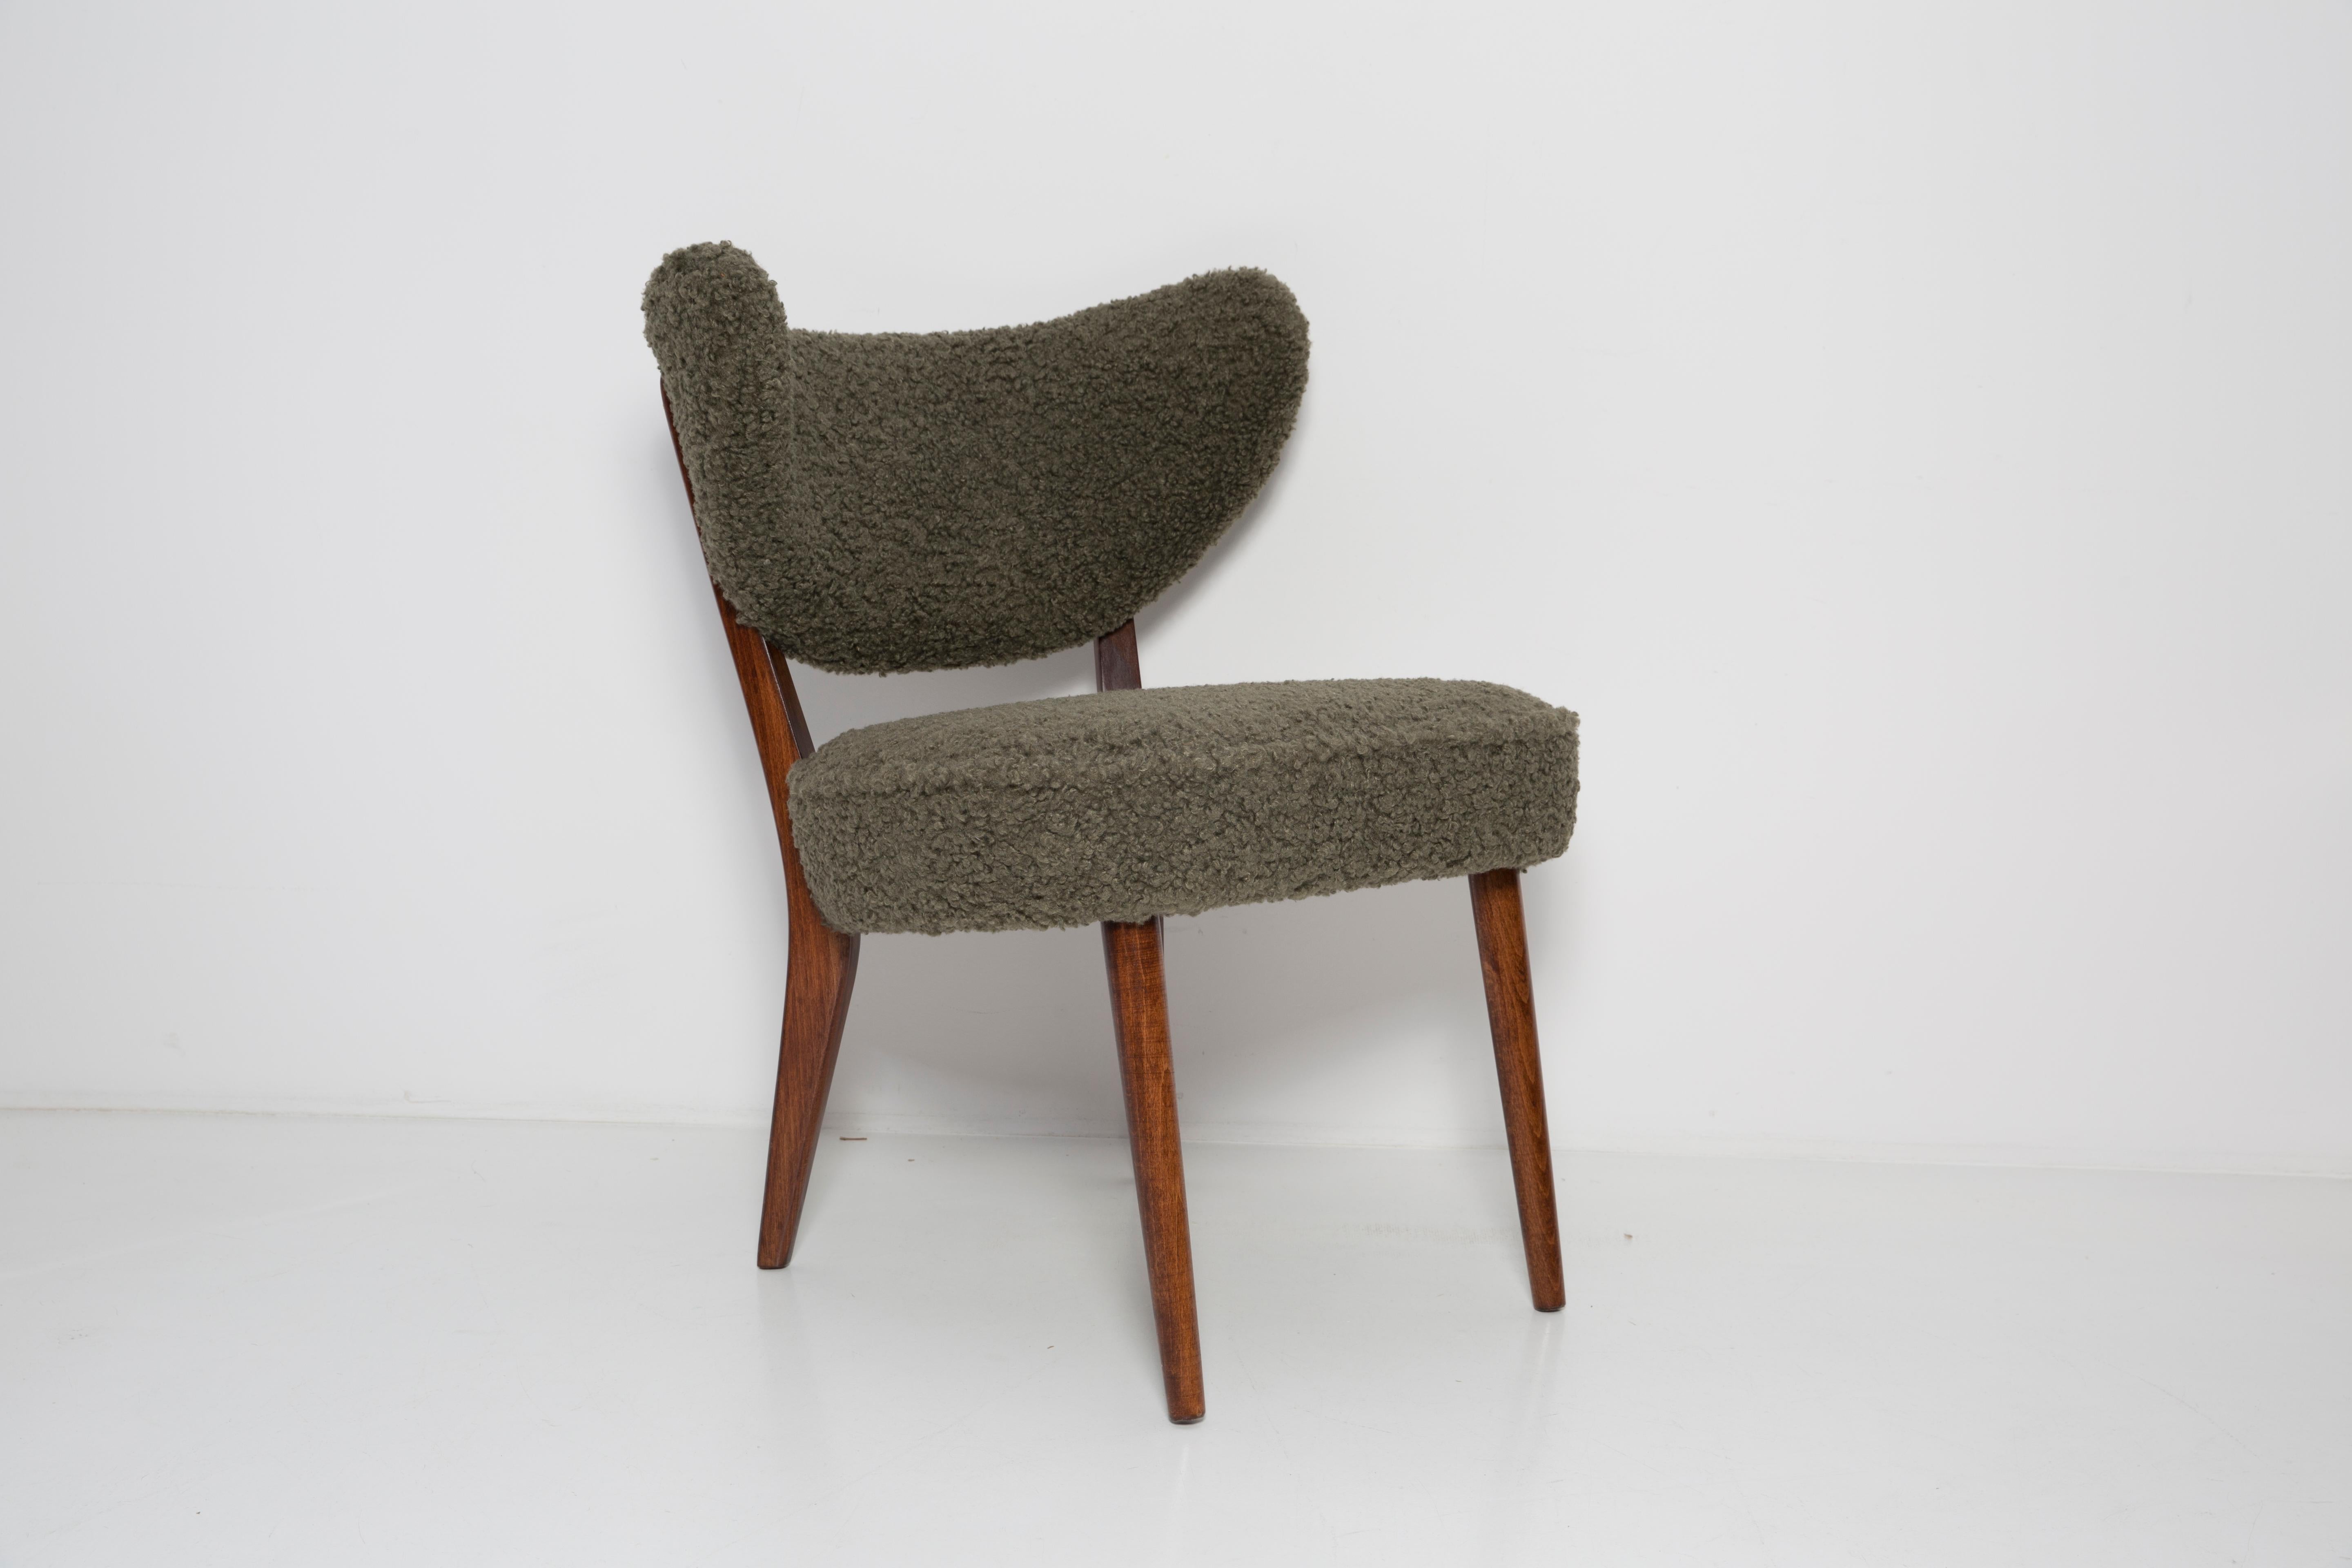 Springy, very comfortable and stabile club seats.
They are contemporary chairs inspired of 1960s style. 
They can be used as armchairs and dining chairs. 

Chair was designed by Vintola Studio, a Polish brand created by Ola Szewczul, designer of